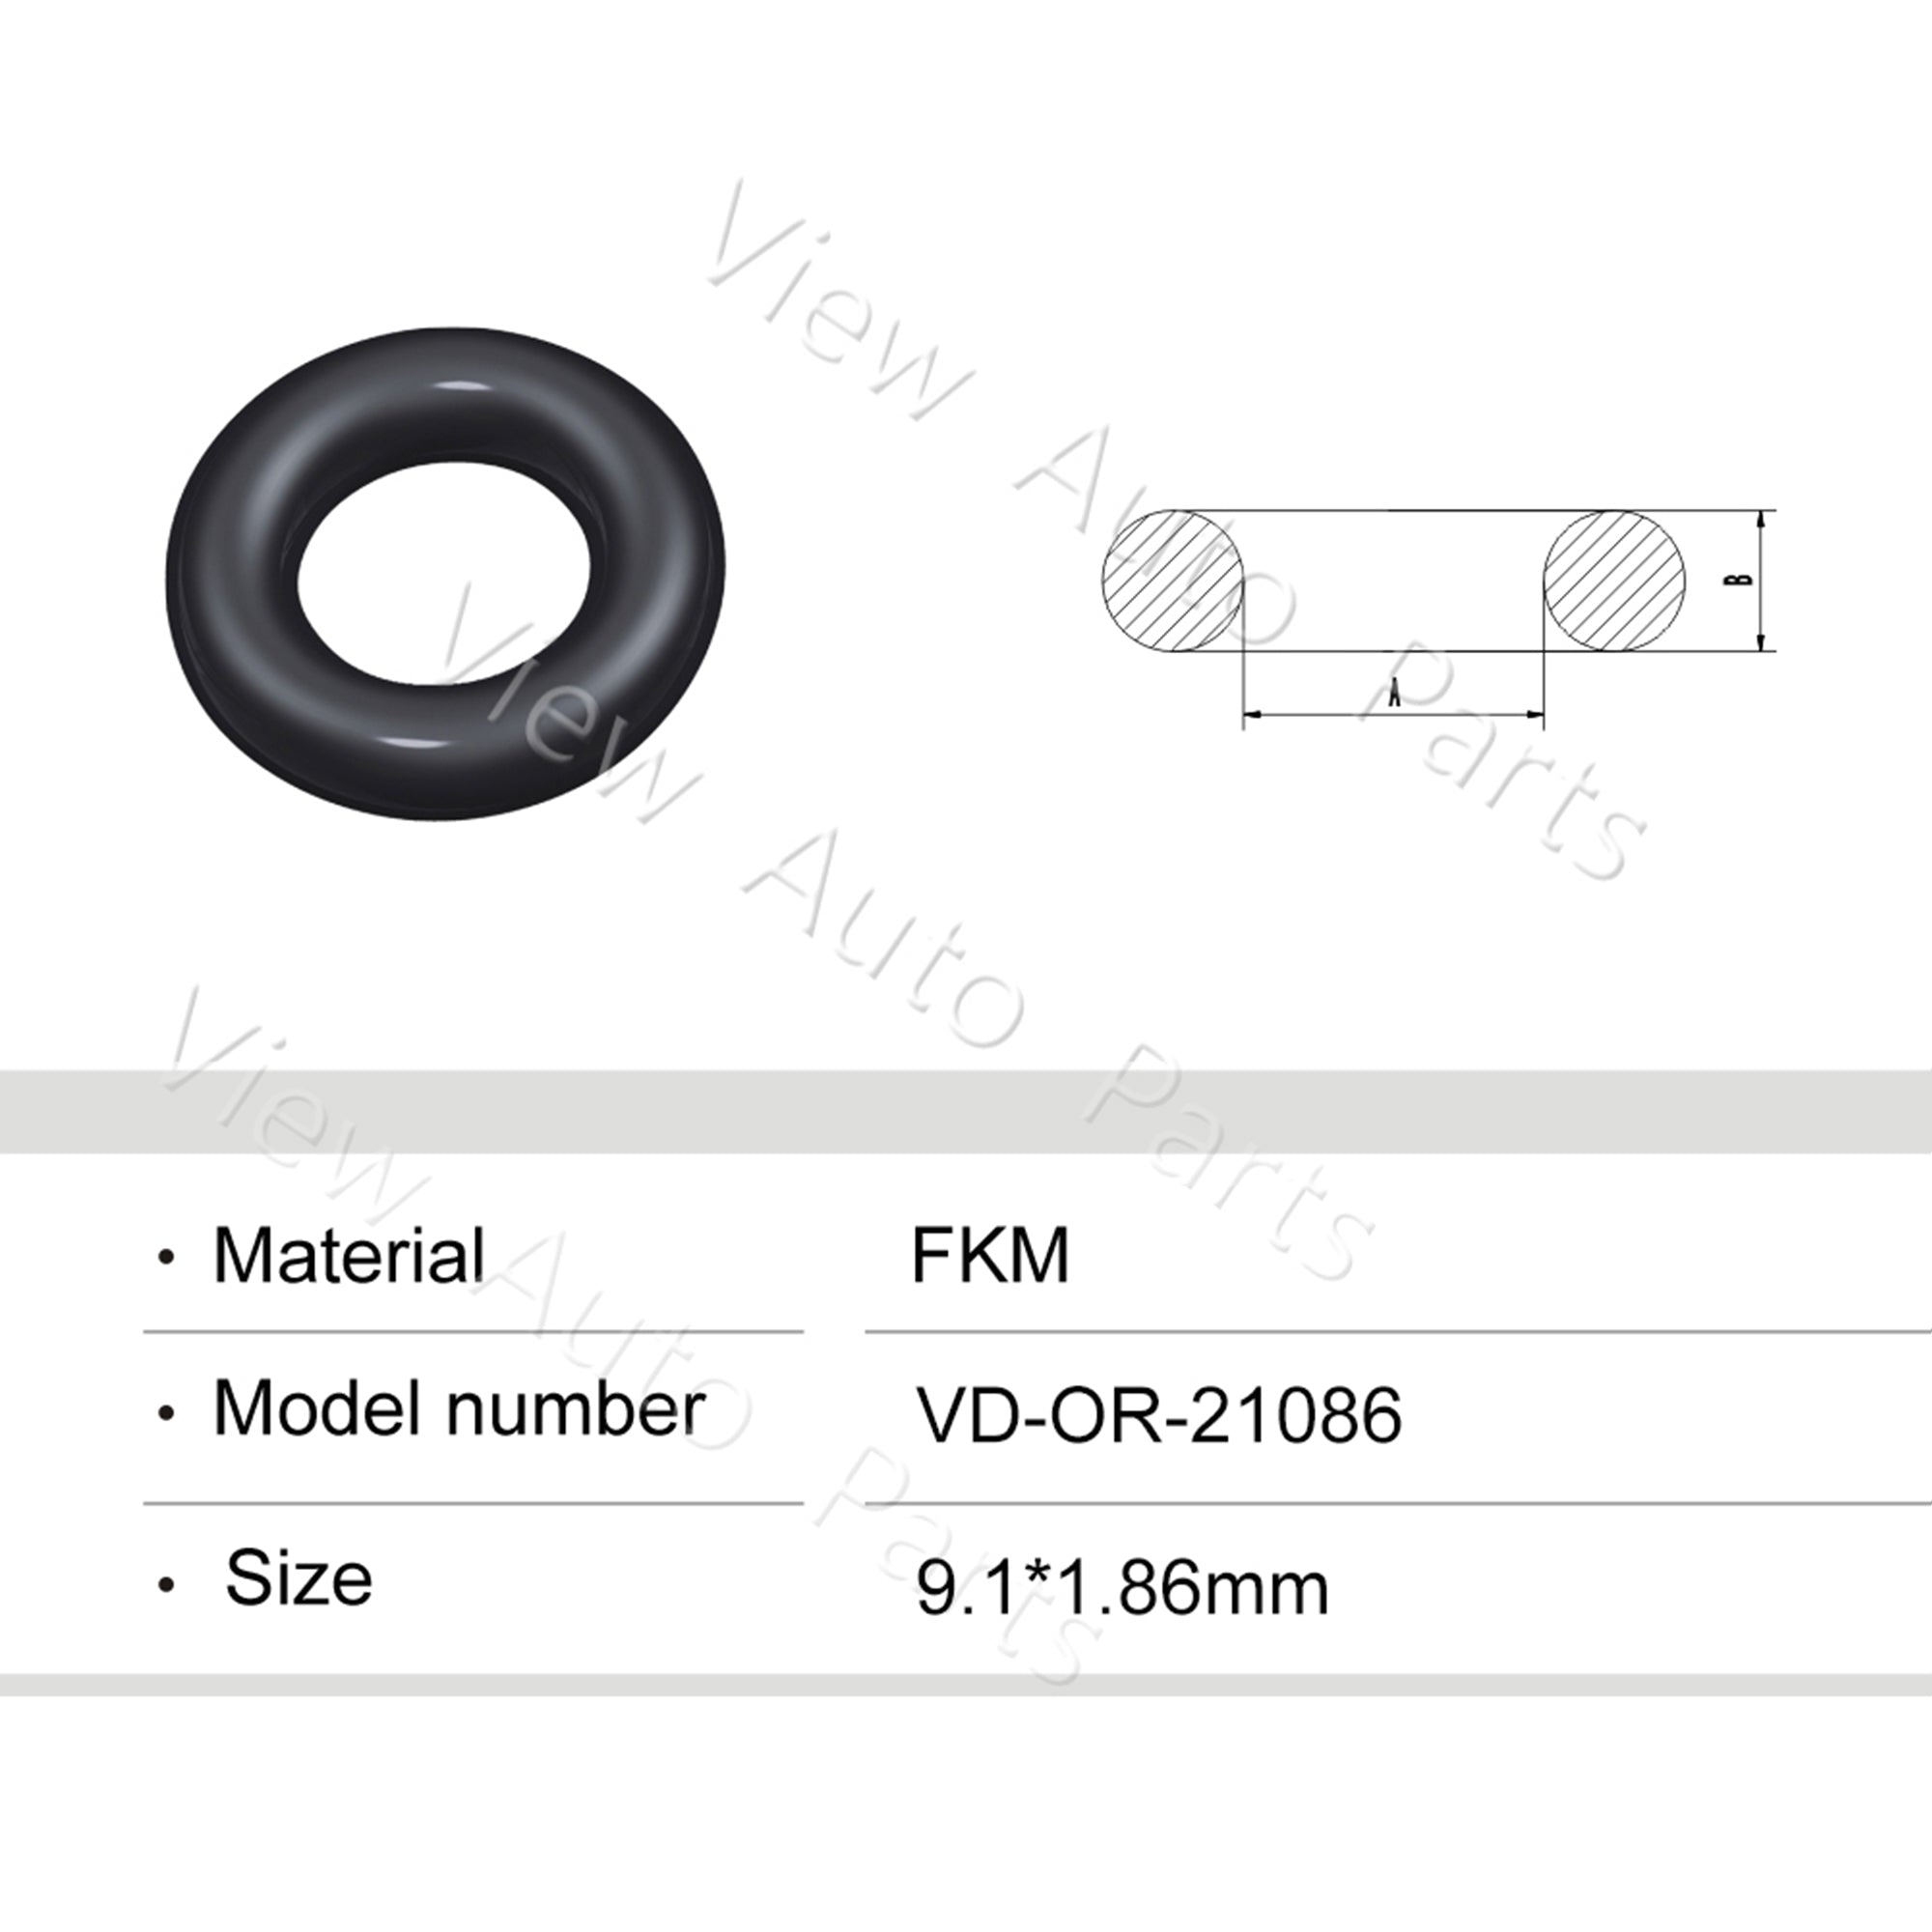 Fuel Injector Rubber Seal Orings for Fuel Injector Repair Kits FKM & Rubber Heat Resistant, Size: 9.1*1.86mm OR-21086